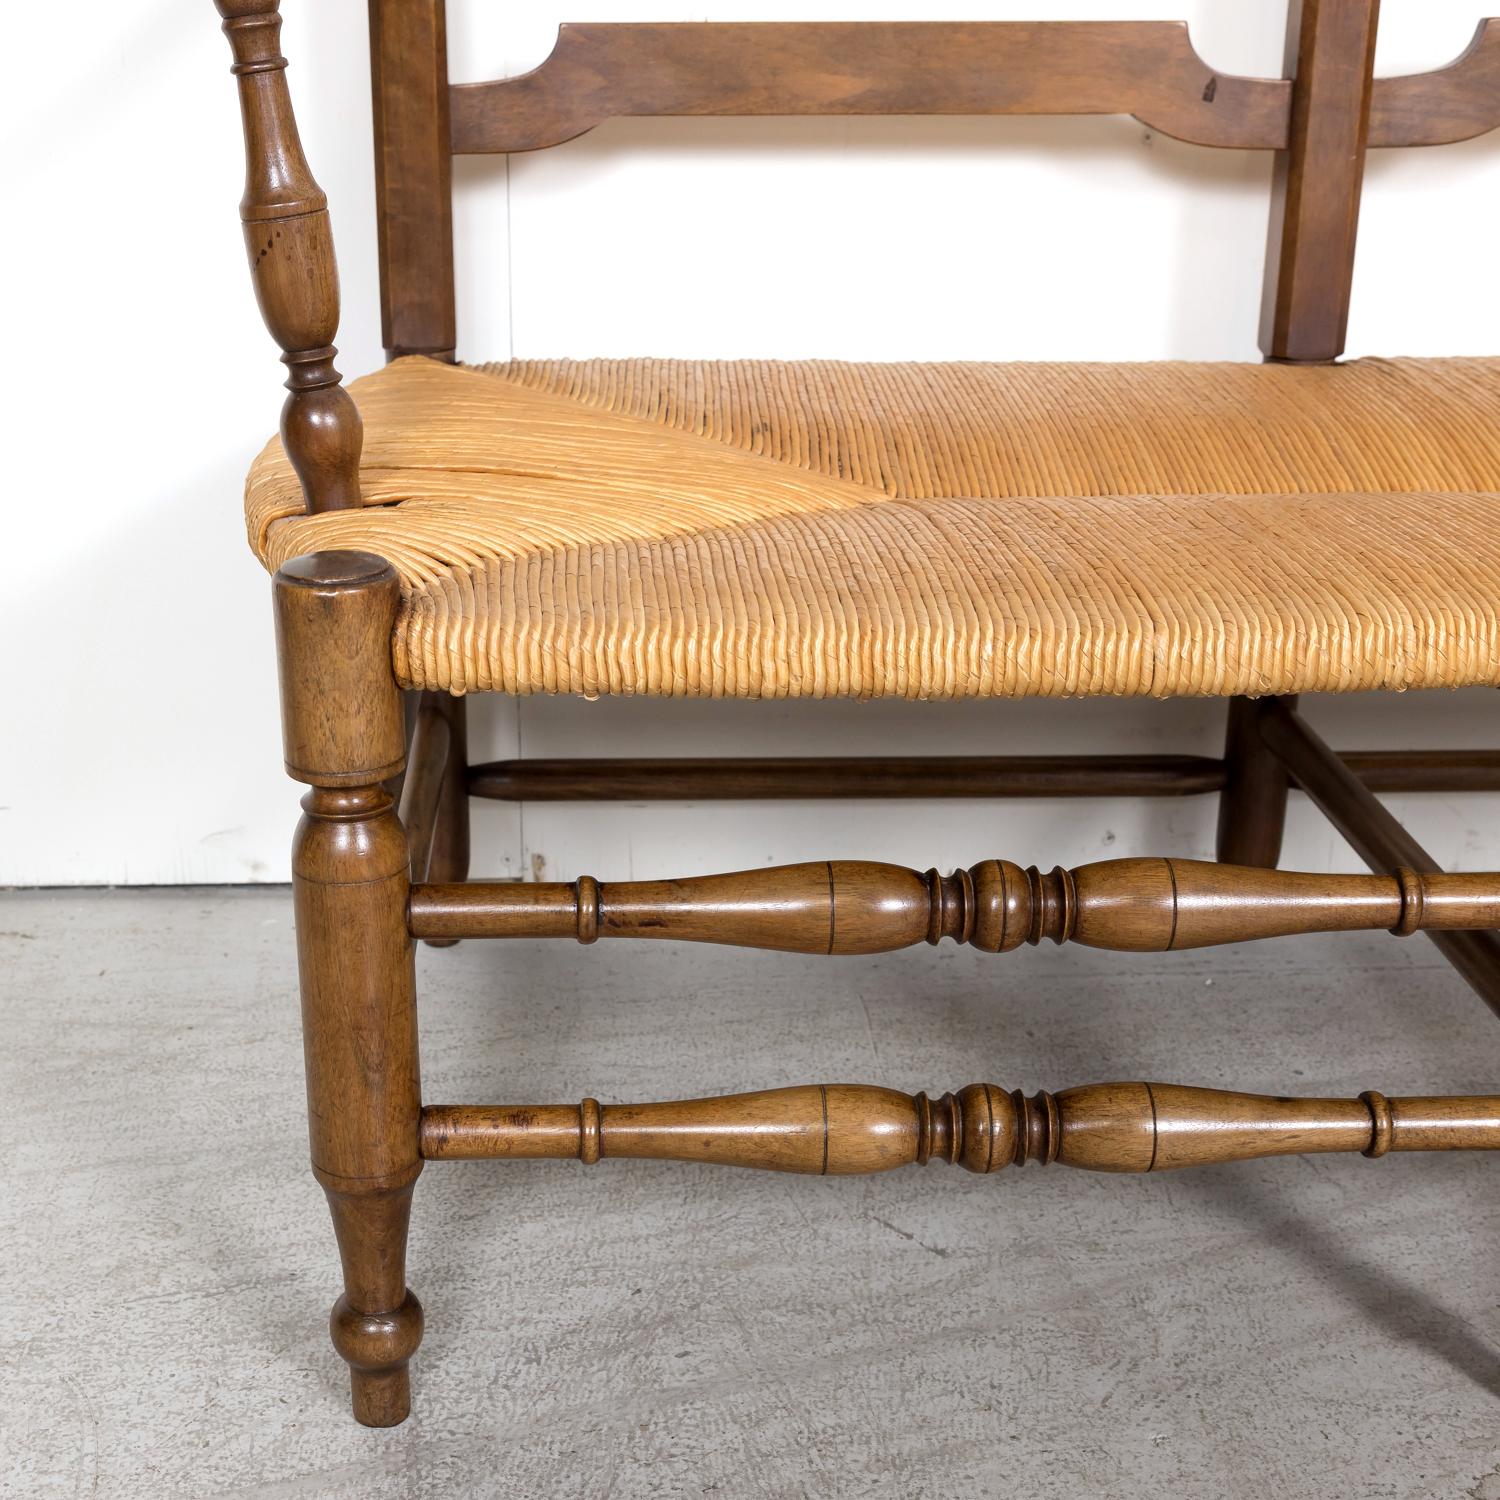 19th Century French Country Walnut Ladder Back Radassier or Settee Rush Seat 5